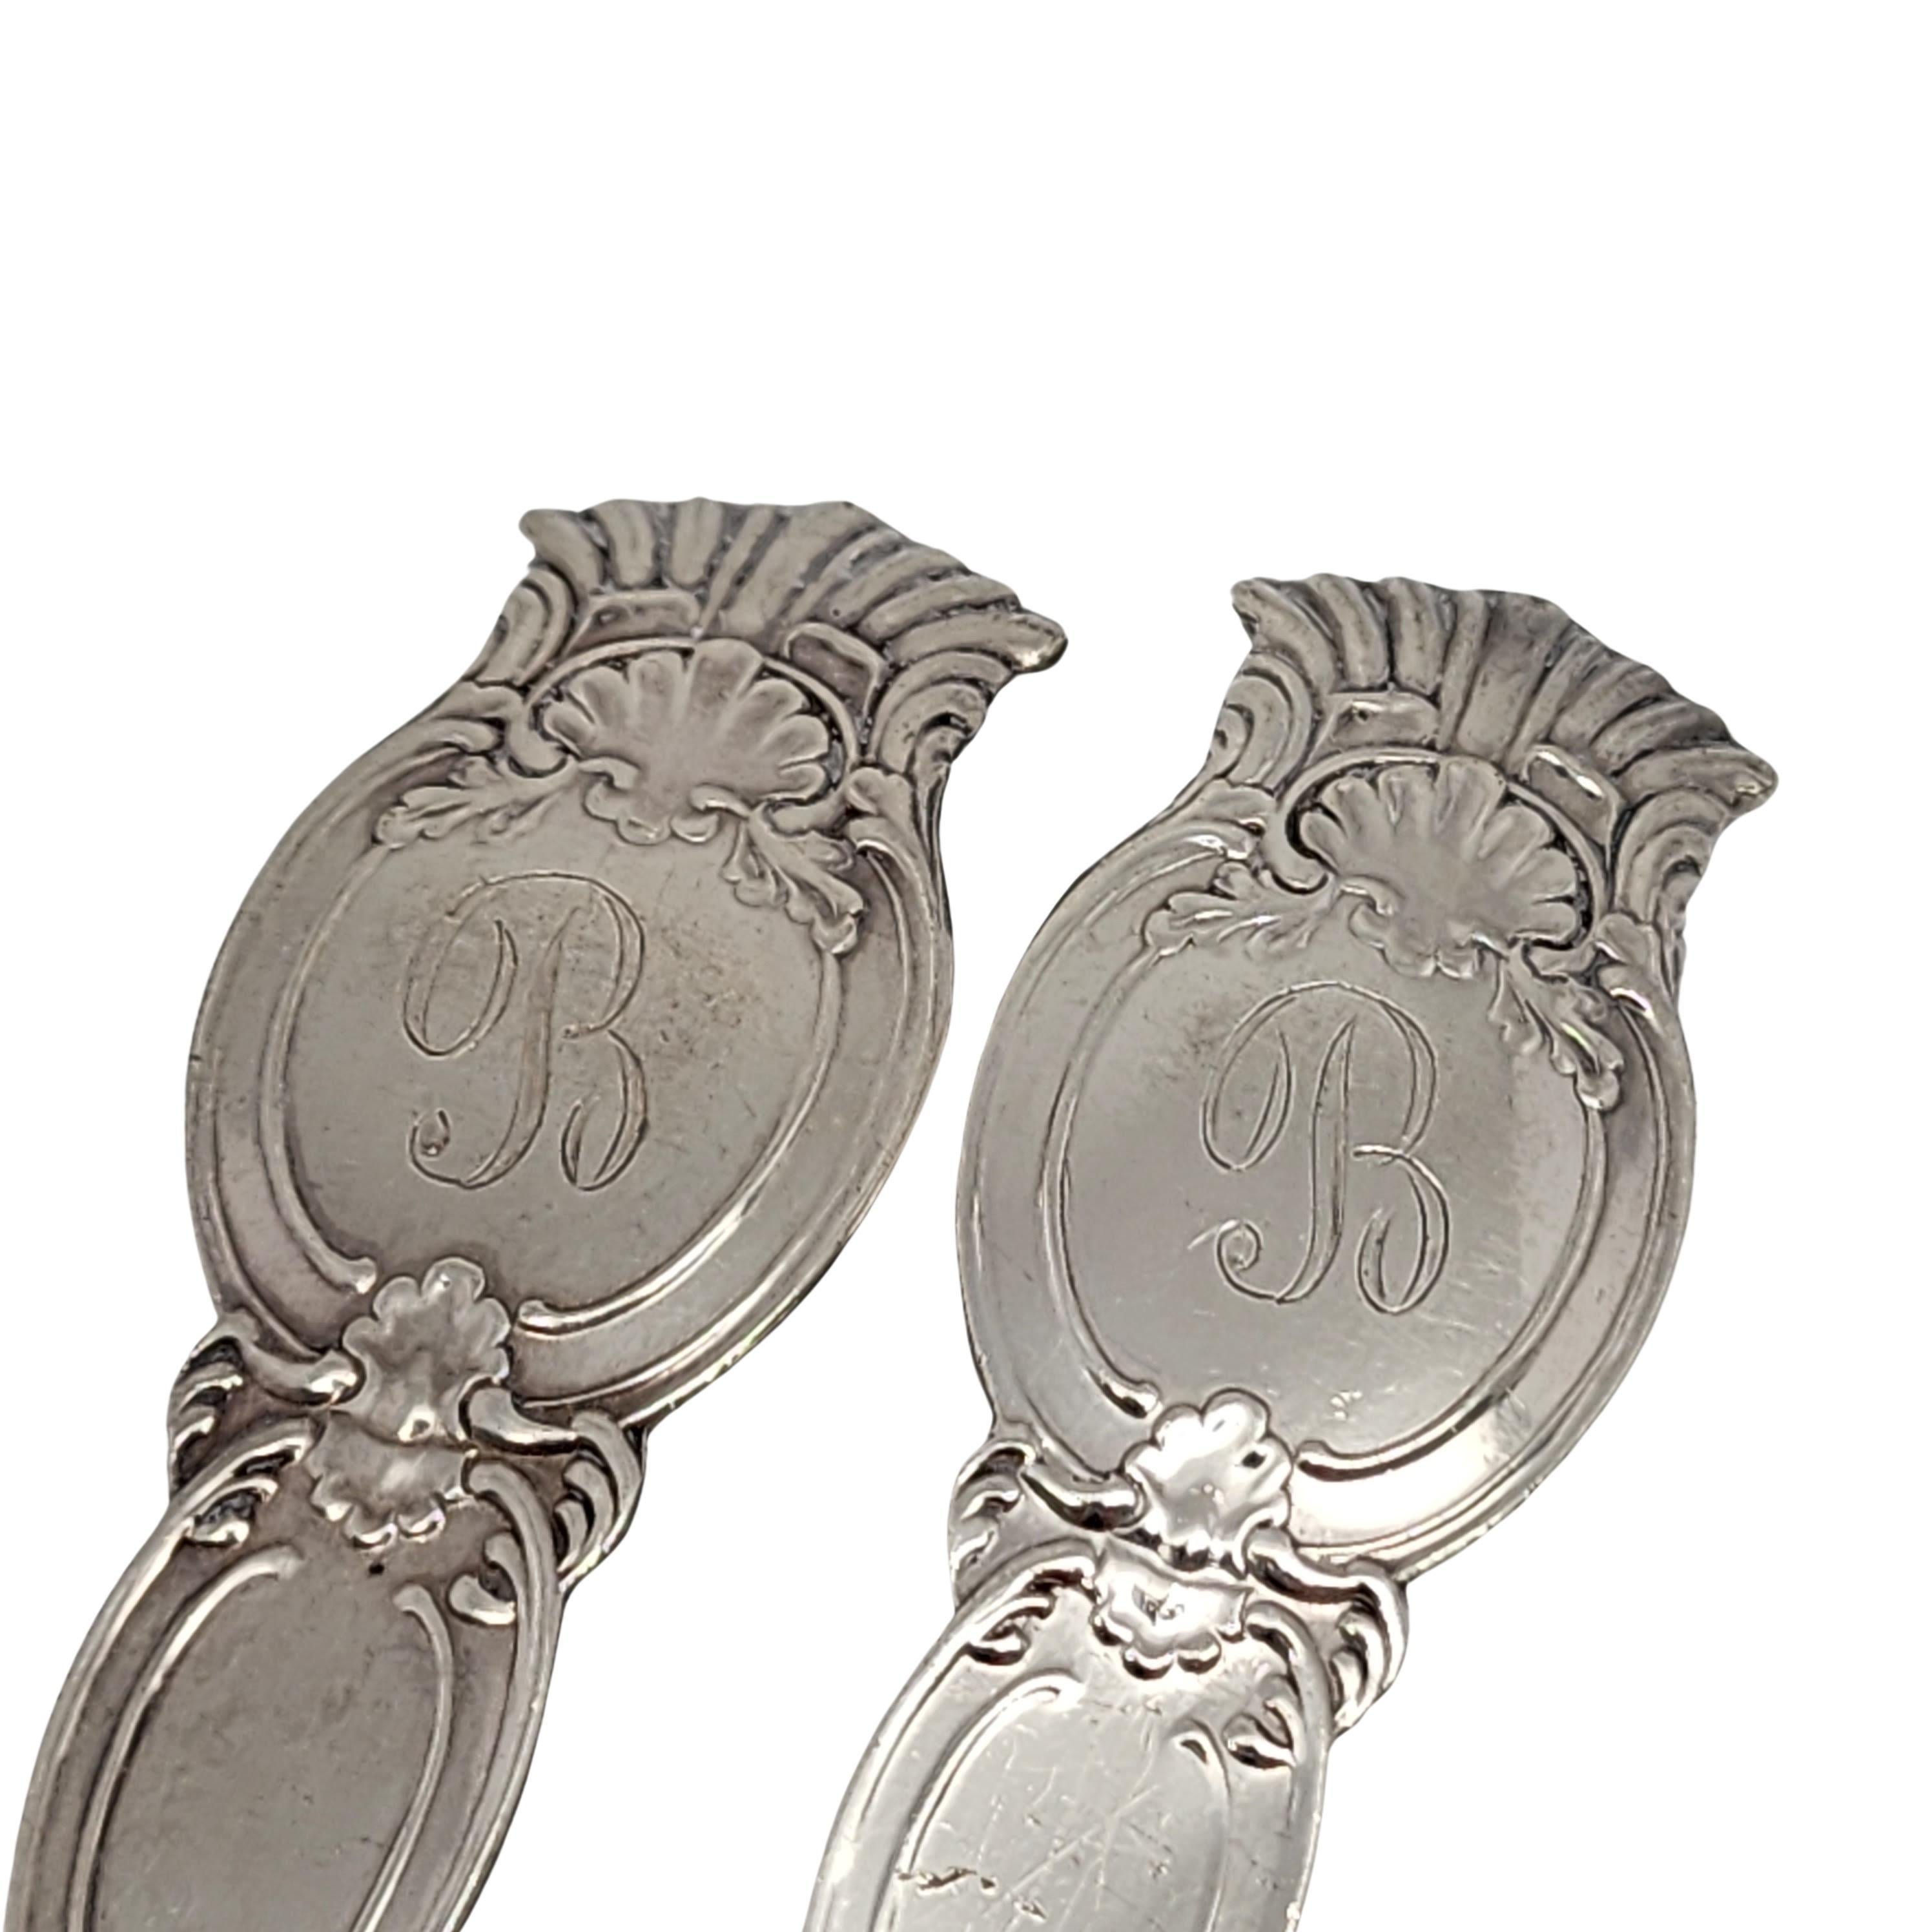 Wendall Mfg Co Ariel Sterling Silver Serving Spoon and Fork Set w/mono #15601 For Sale 4